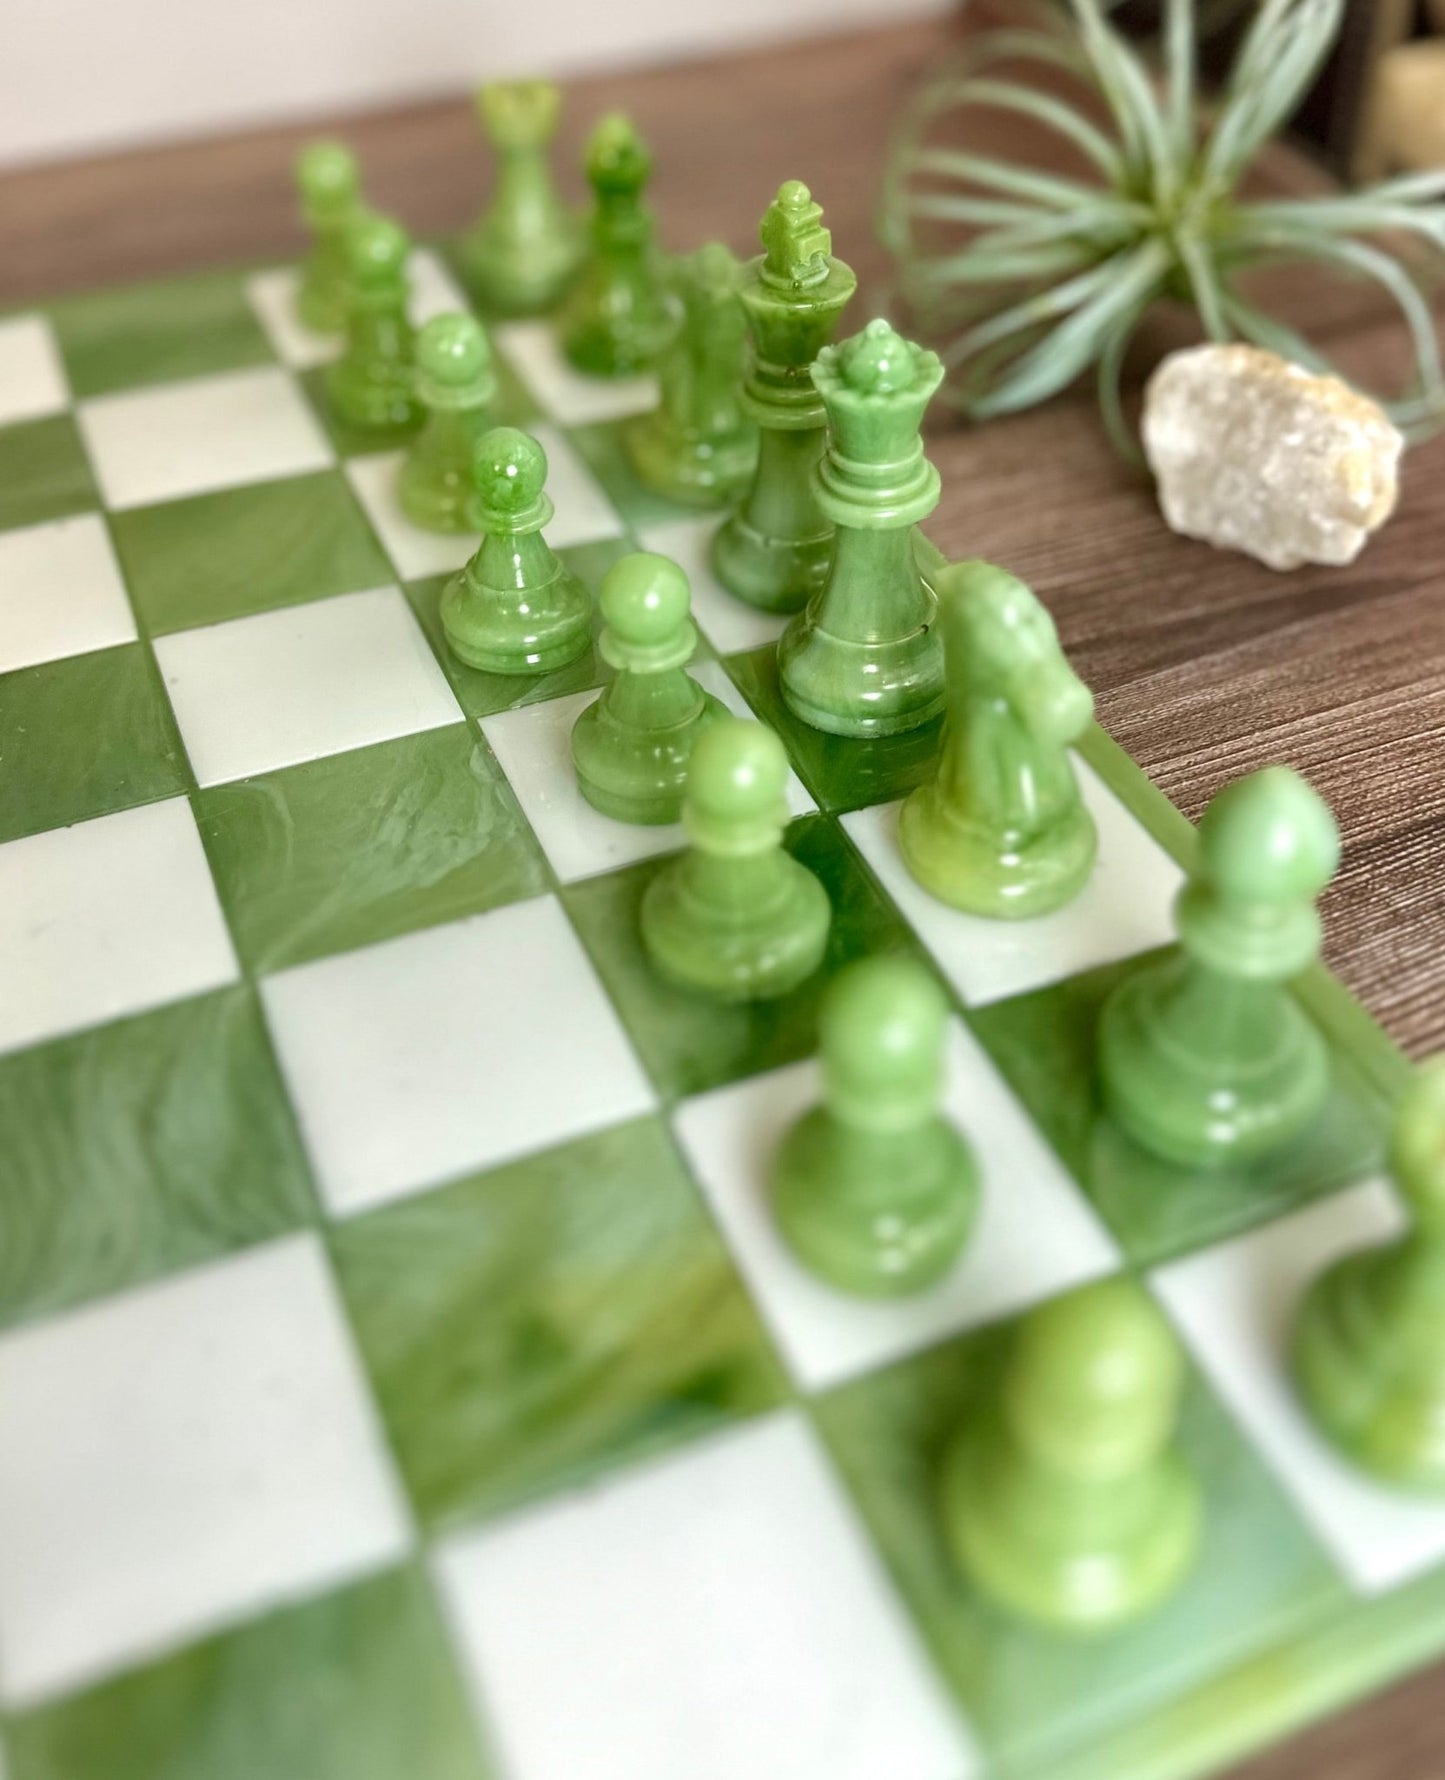 Green Marbled Chess Set - Bragg About It Artistry